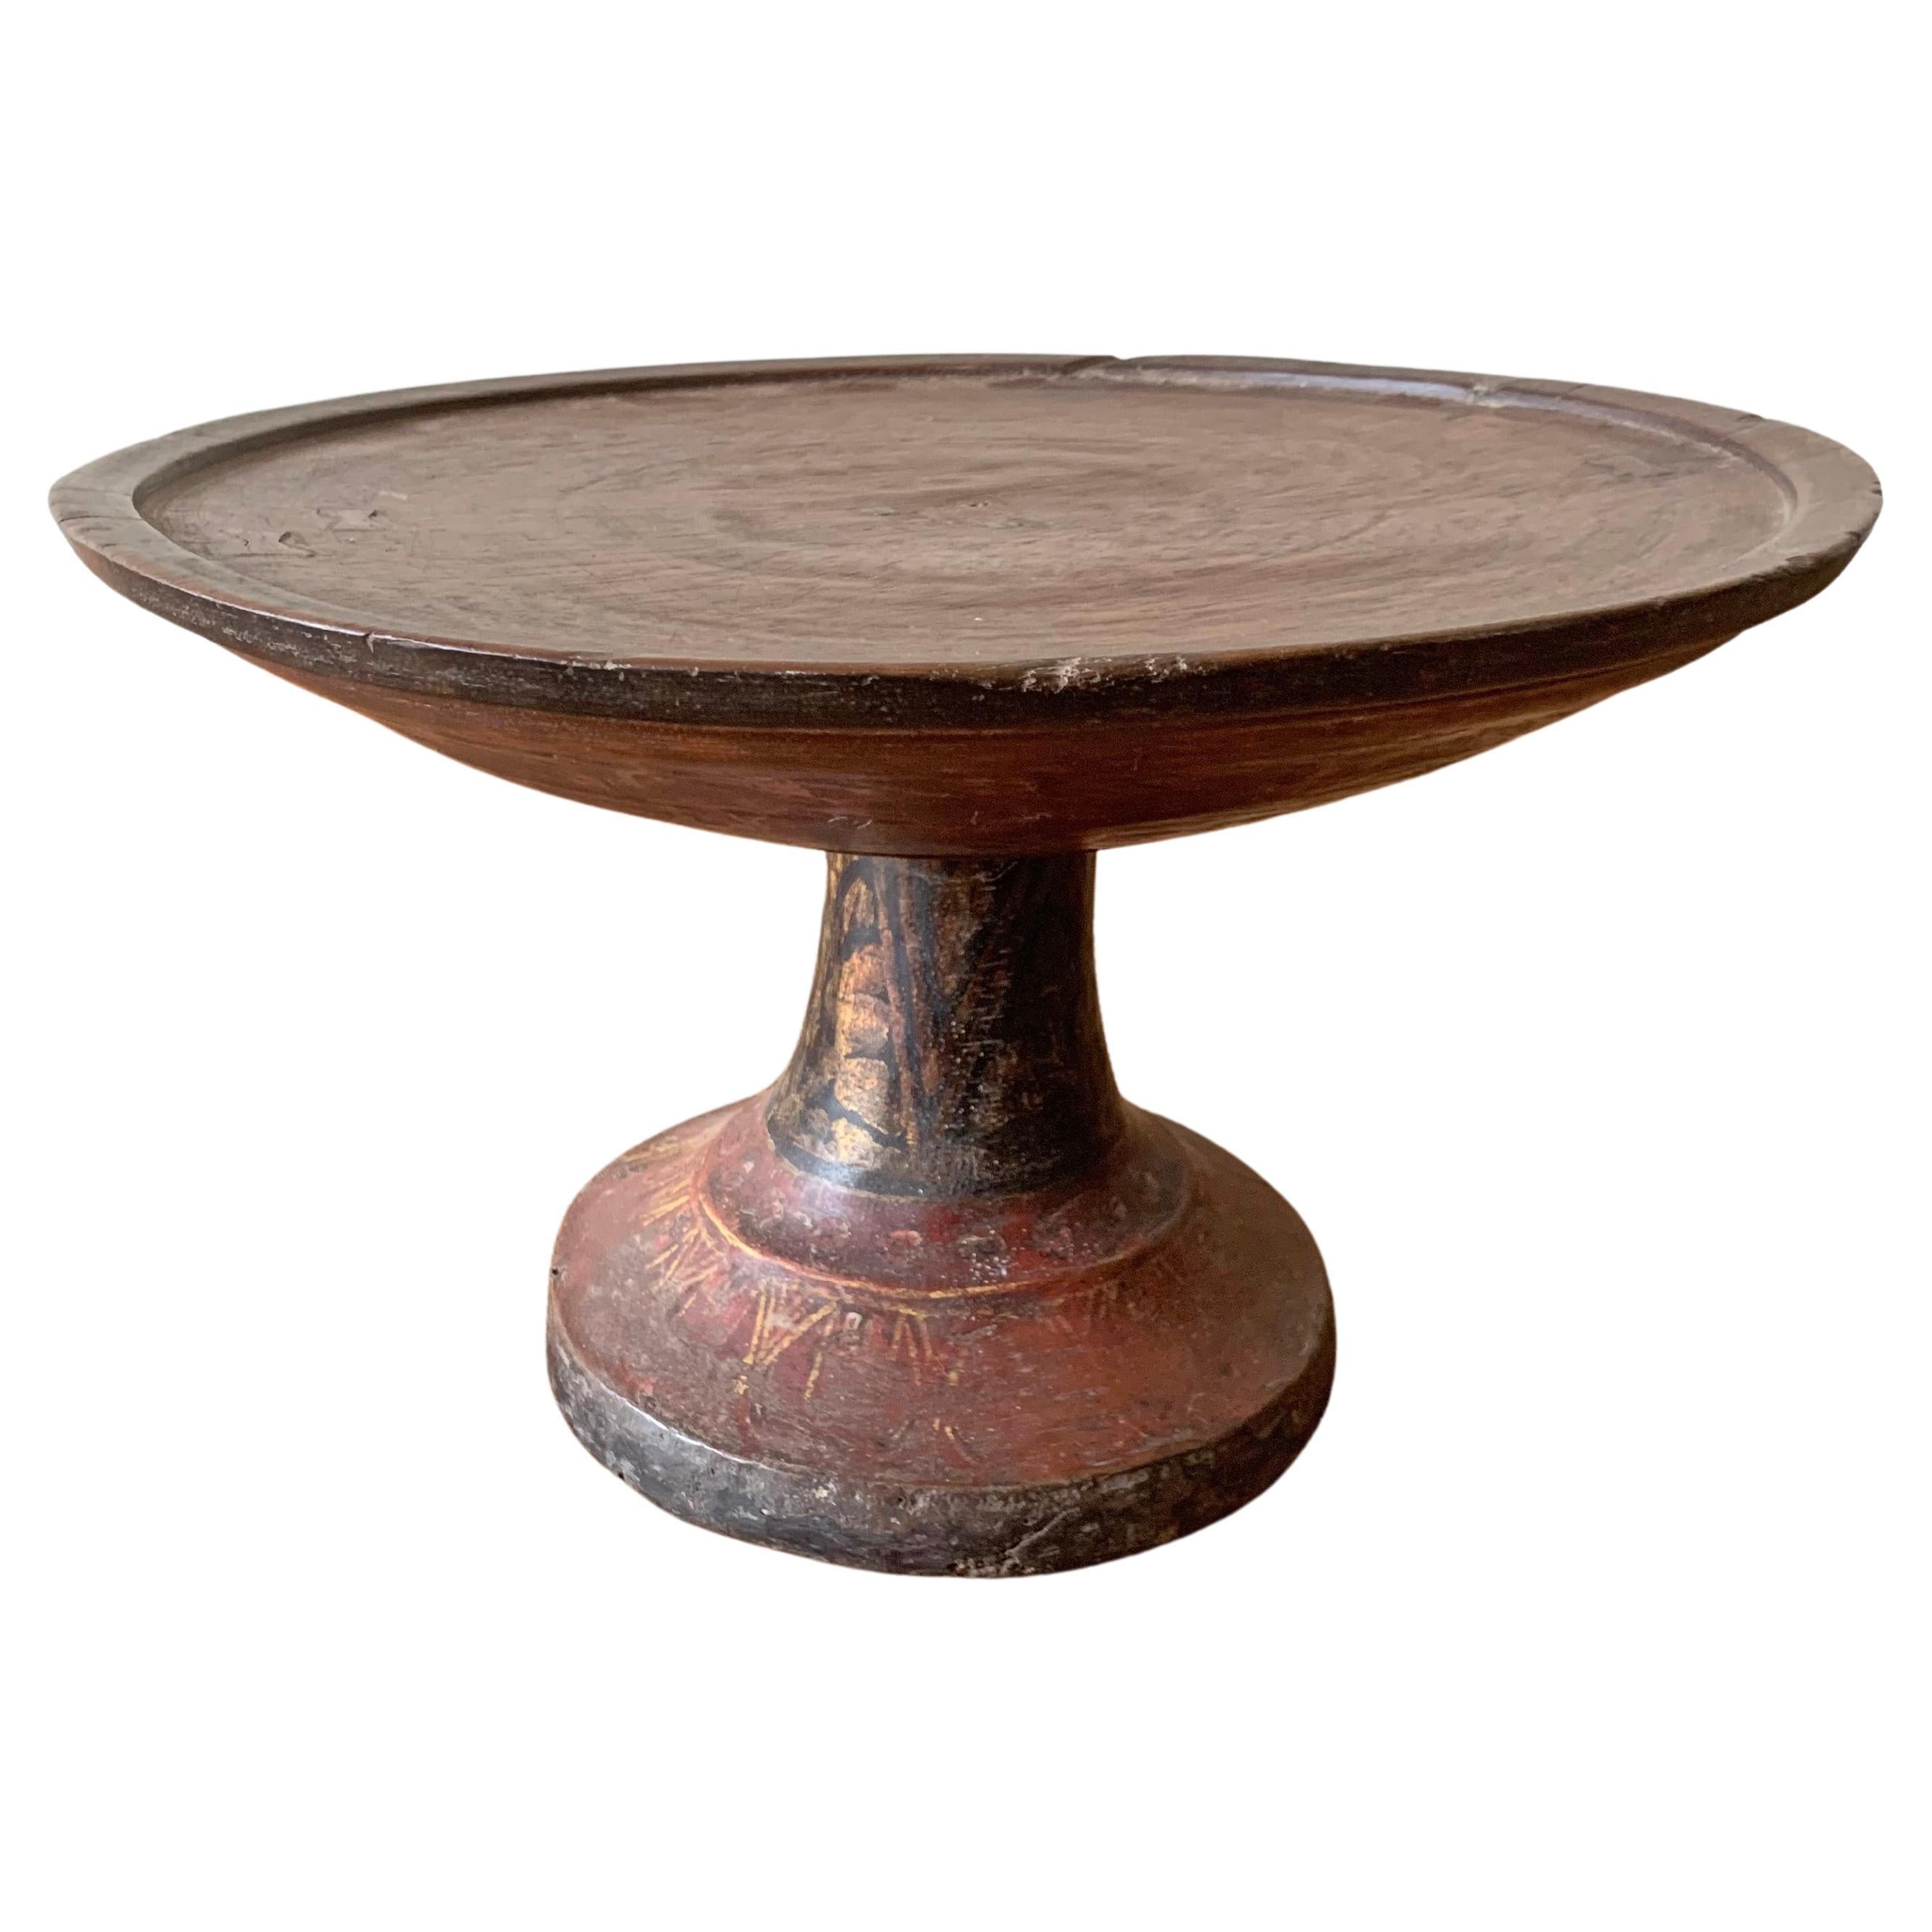 19th Century Balinese Offering Tray / Bowl 'Dulang' For Sale